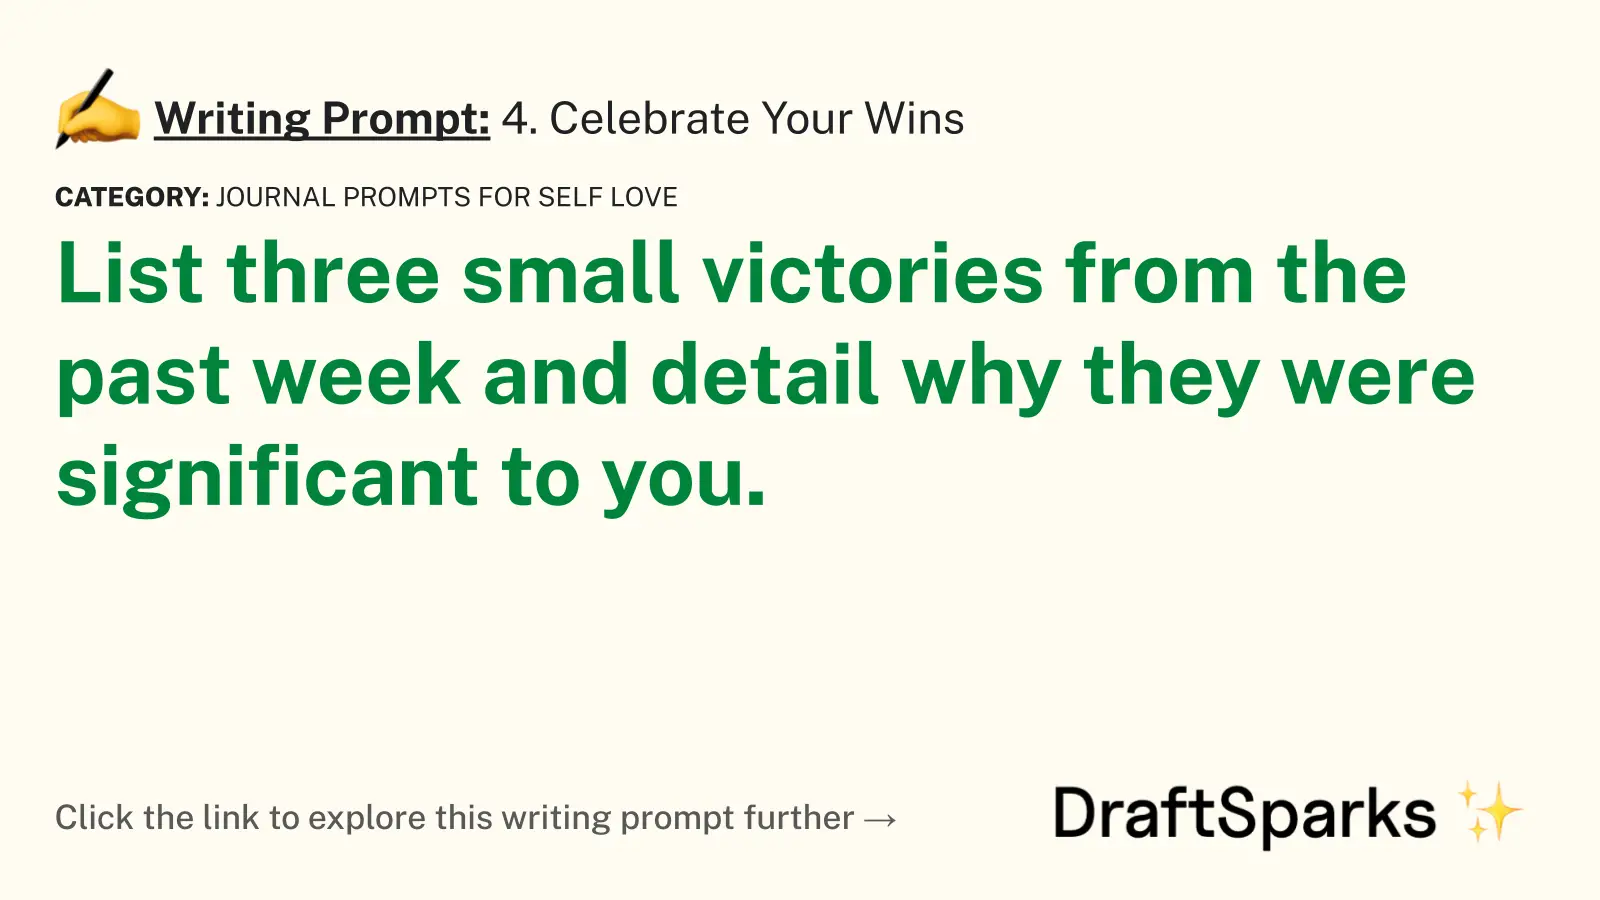 4. Celebrate Your Wins